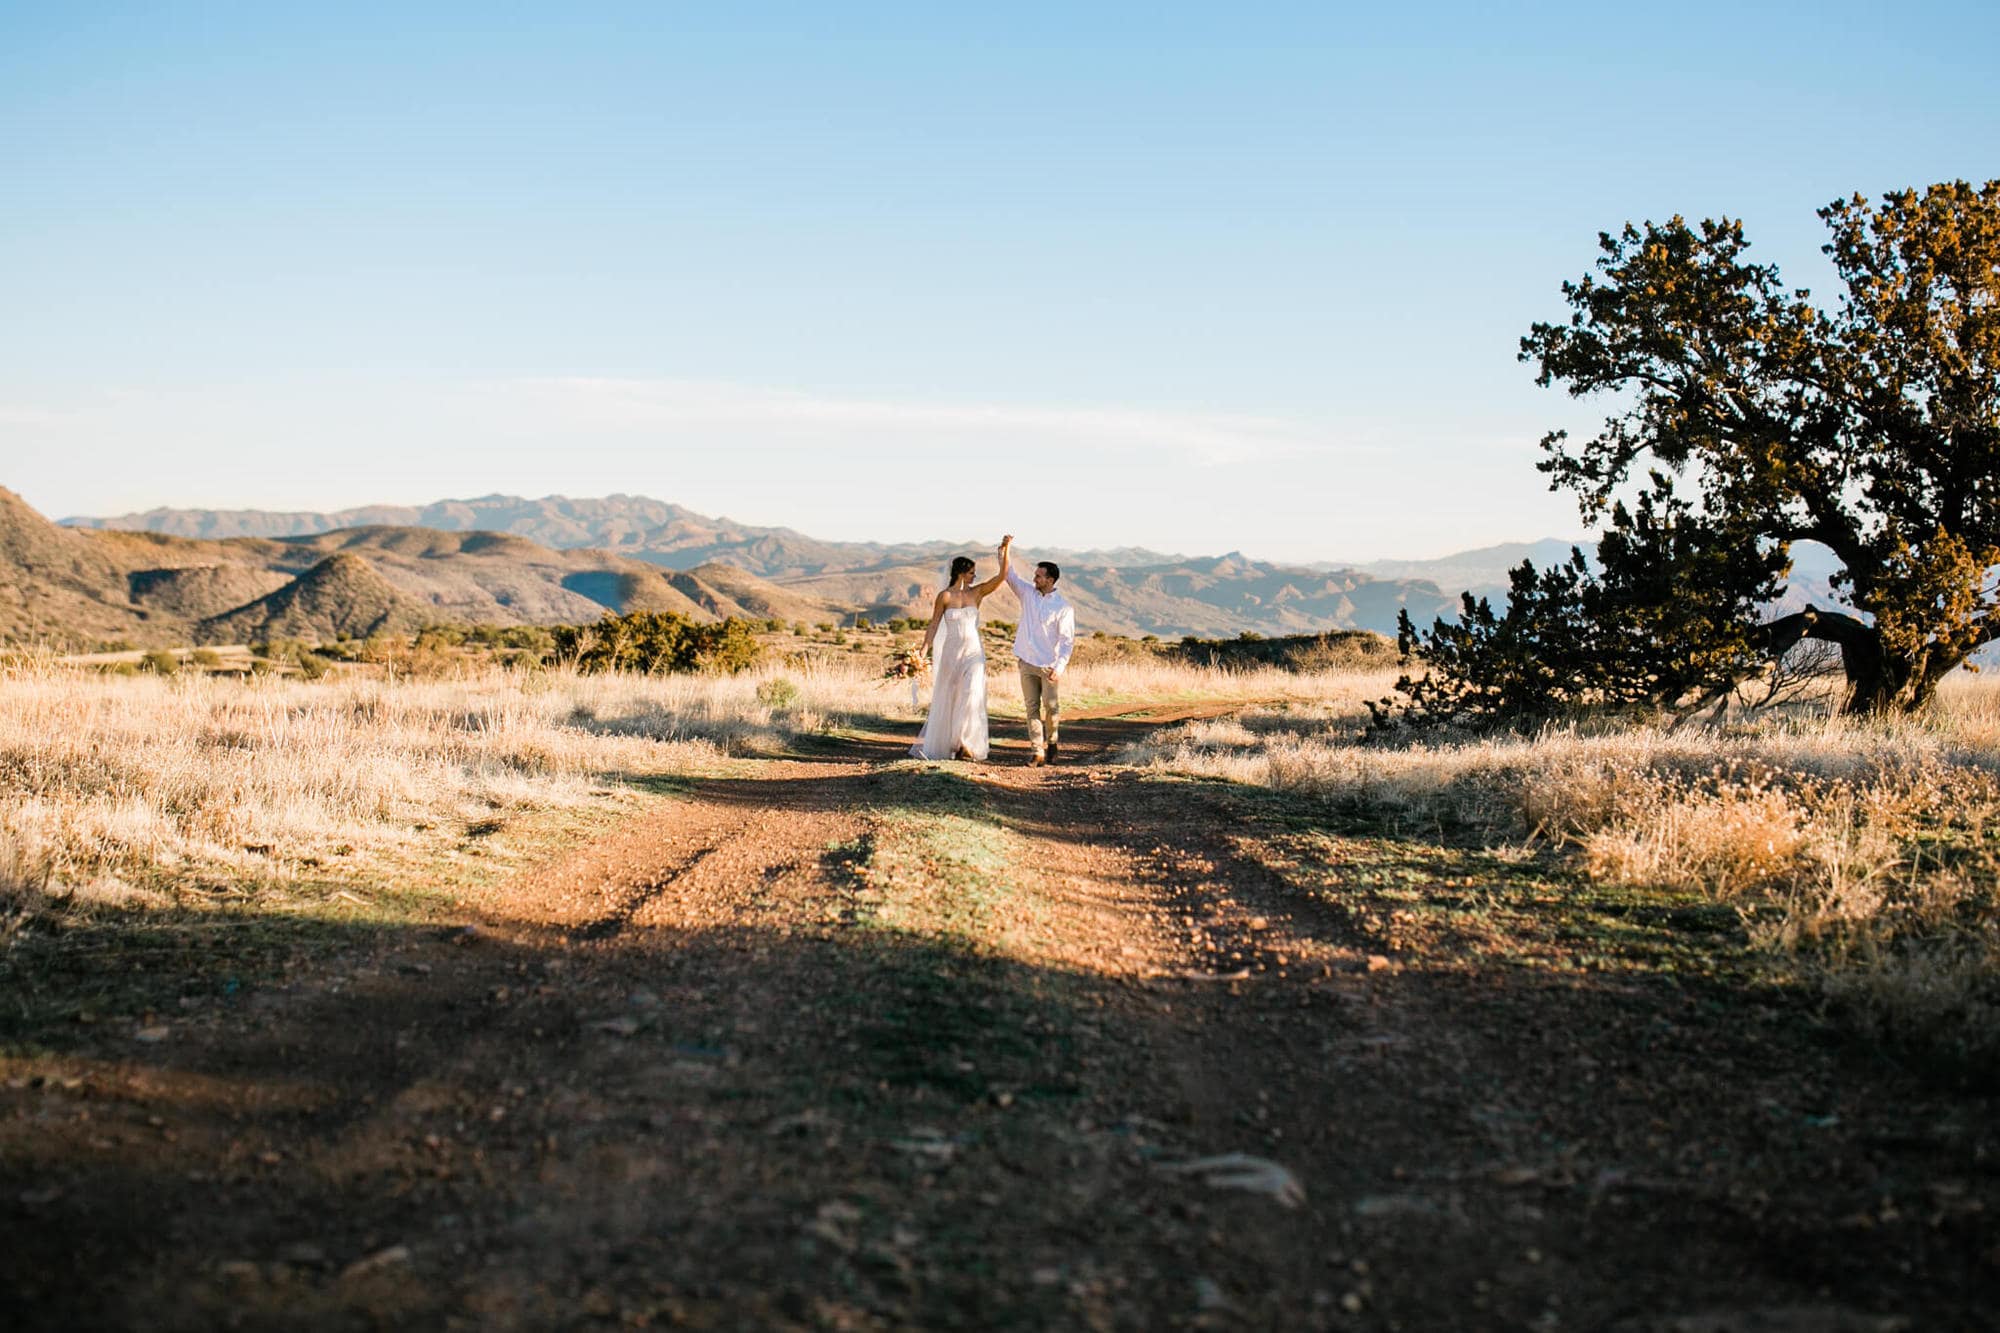 The bride and groom walk up the mountain dirt road and dance.